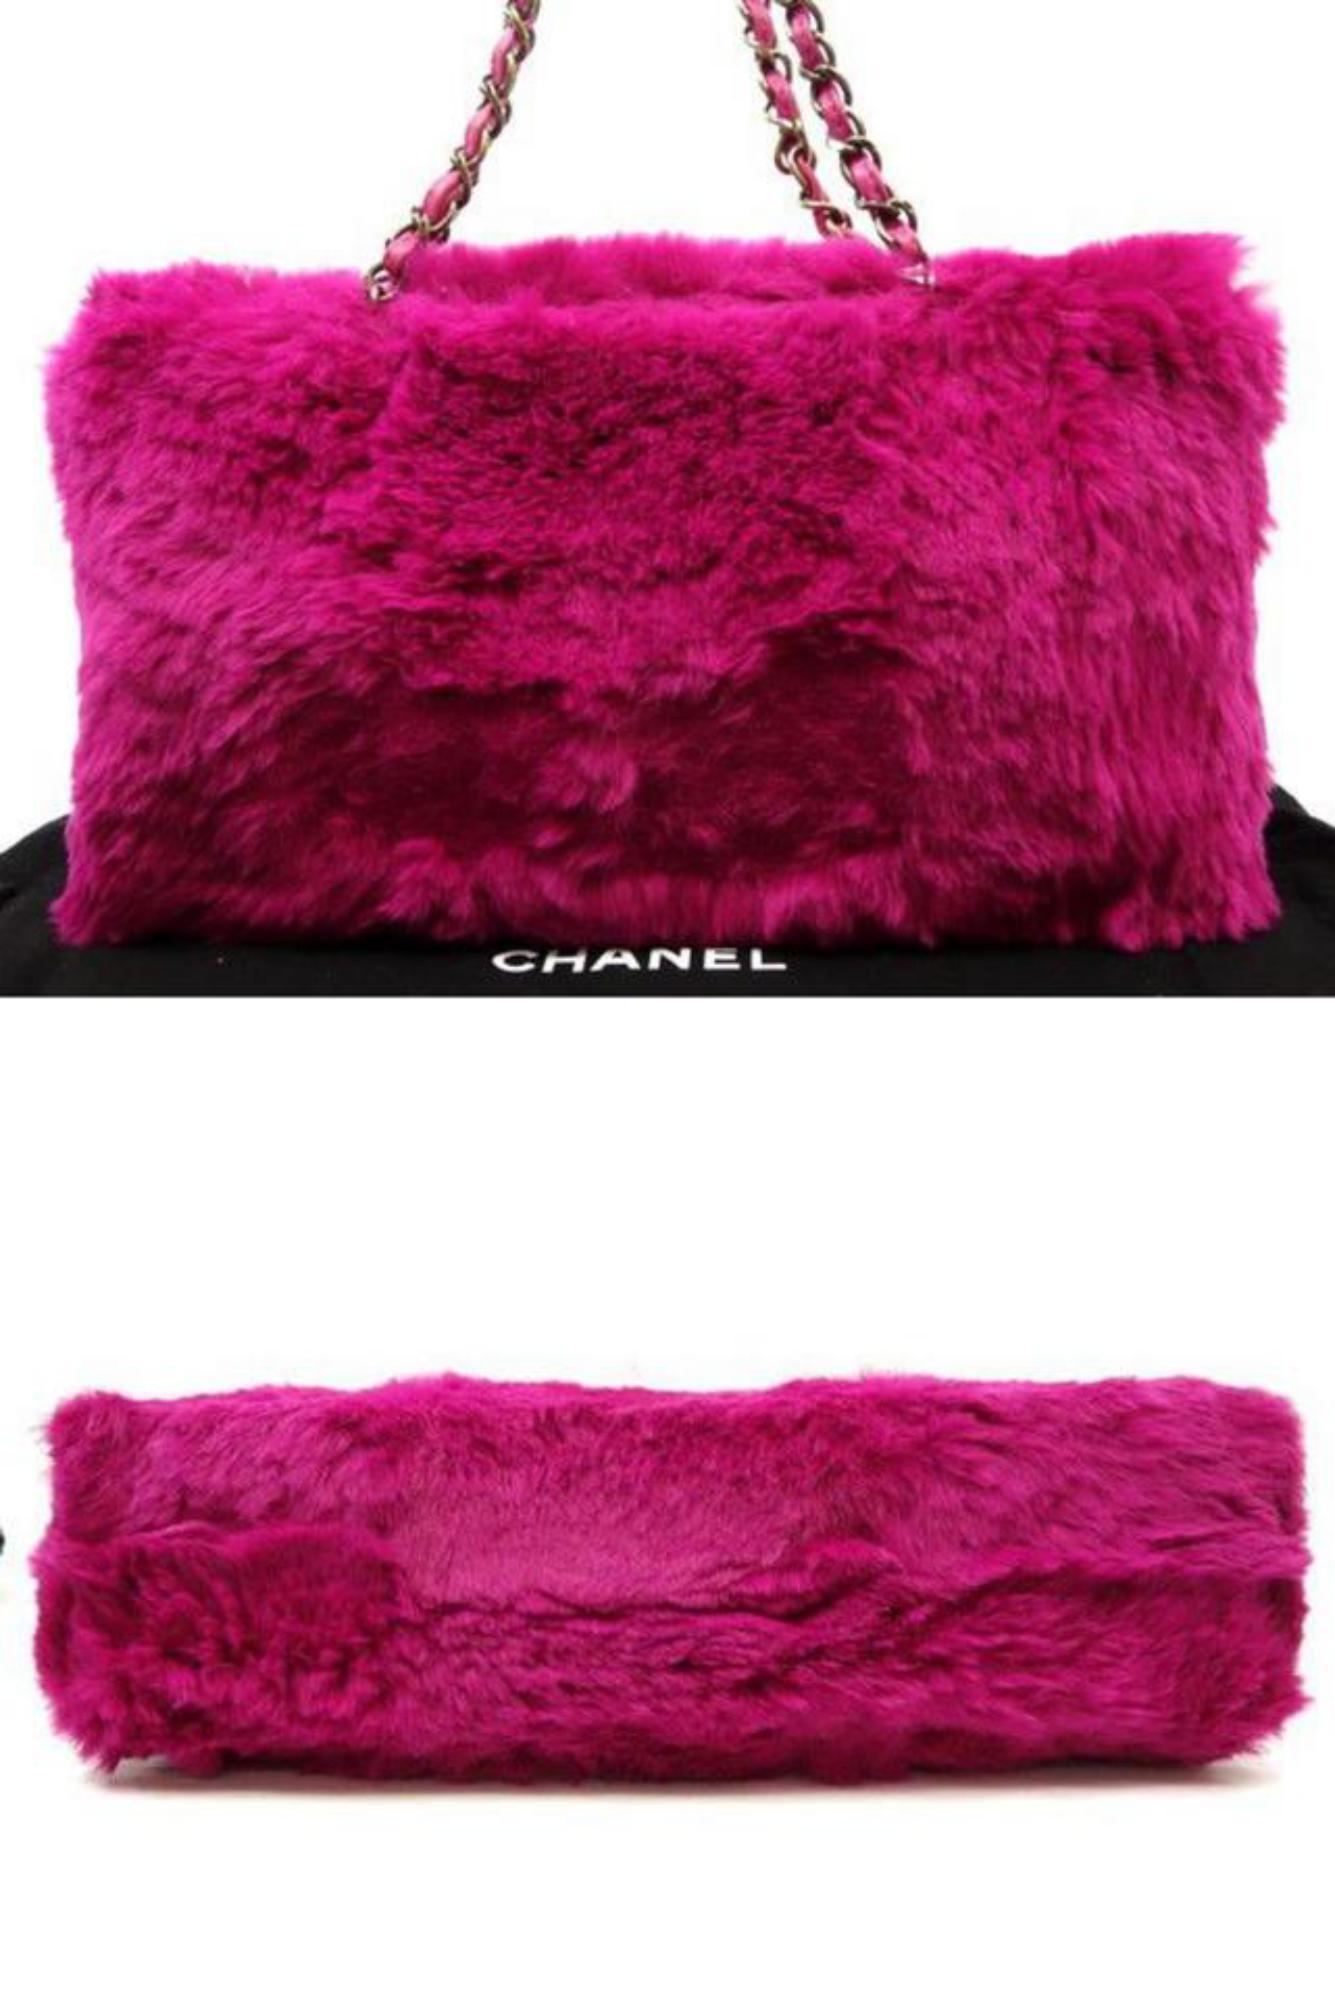 Chanel Fuchsia Chain Tote 228729 Pink Rabbit Fur Shoulder Bag In Good Condition For Sale In Forest Hills, NY